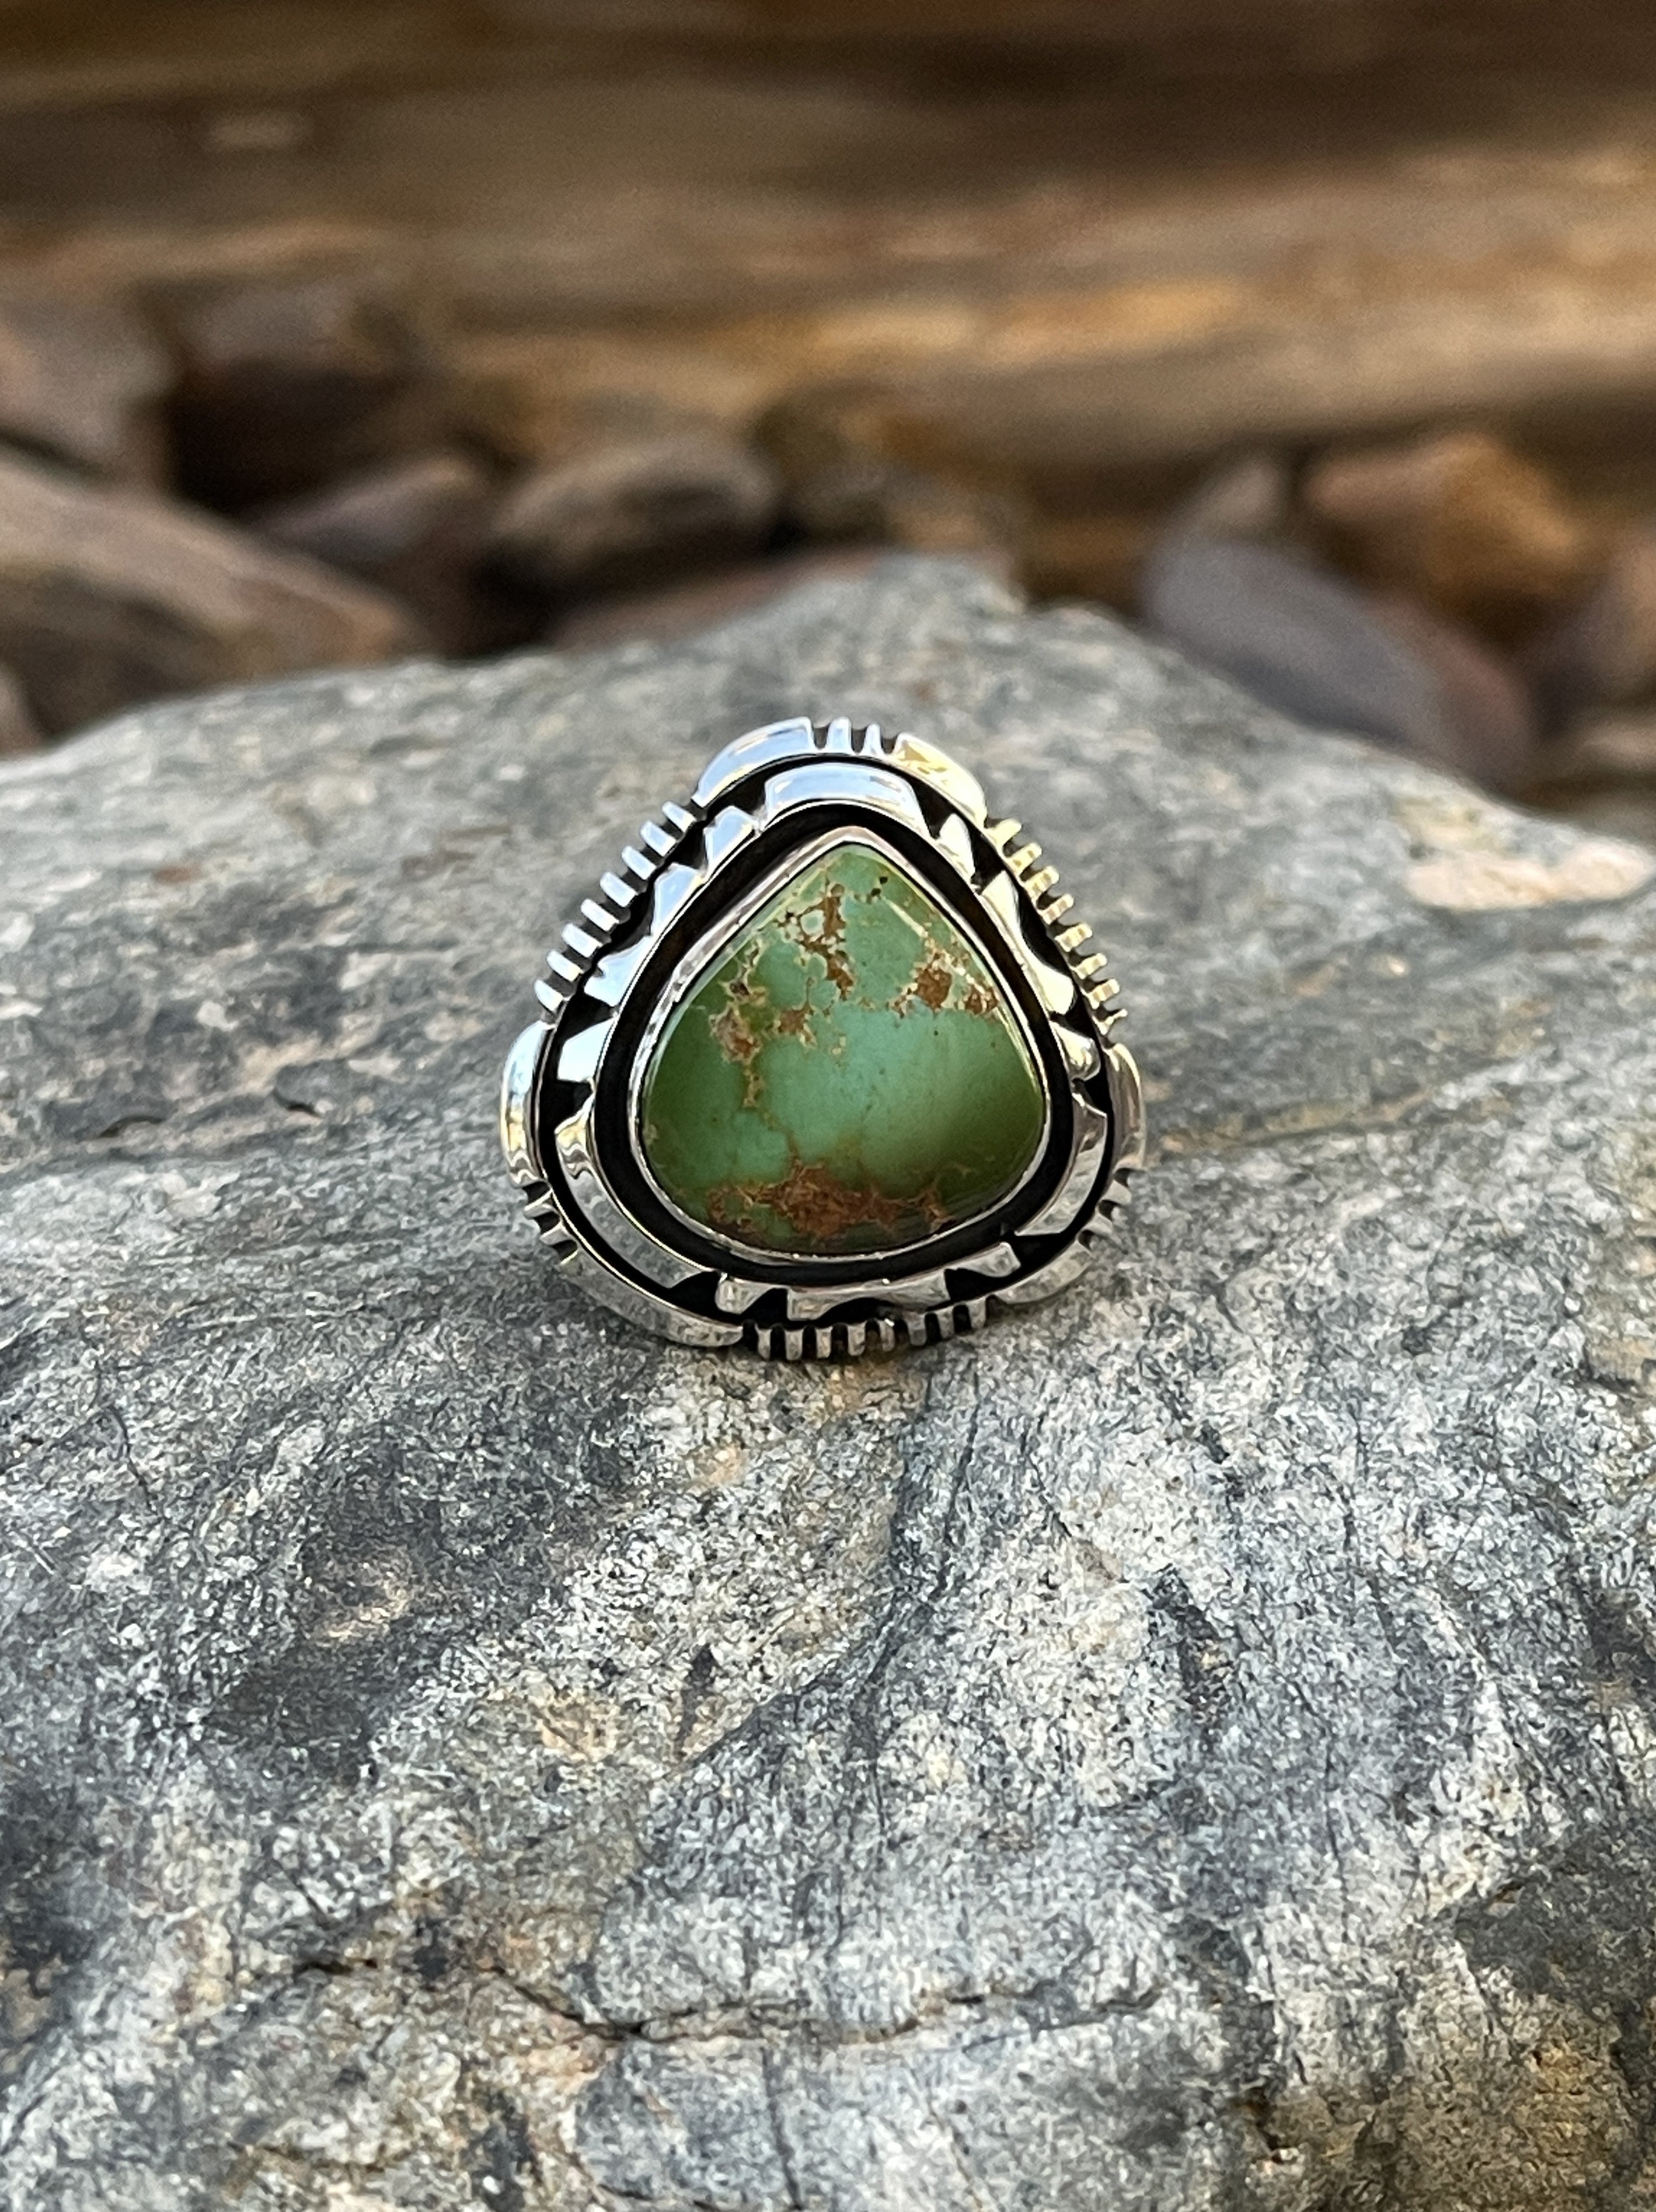 Handmade Solid Sterling Silver Green Royston Turquoise Ring - Size 6 1/2